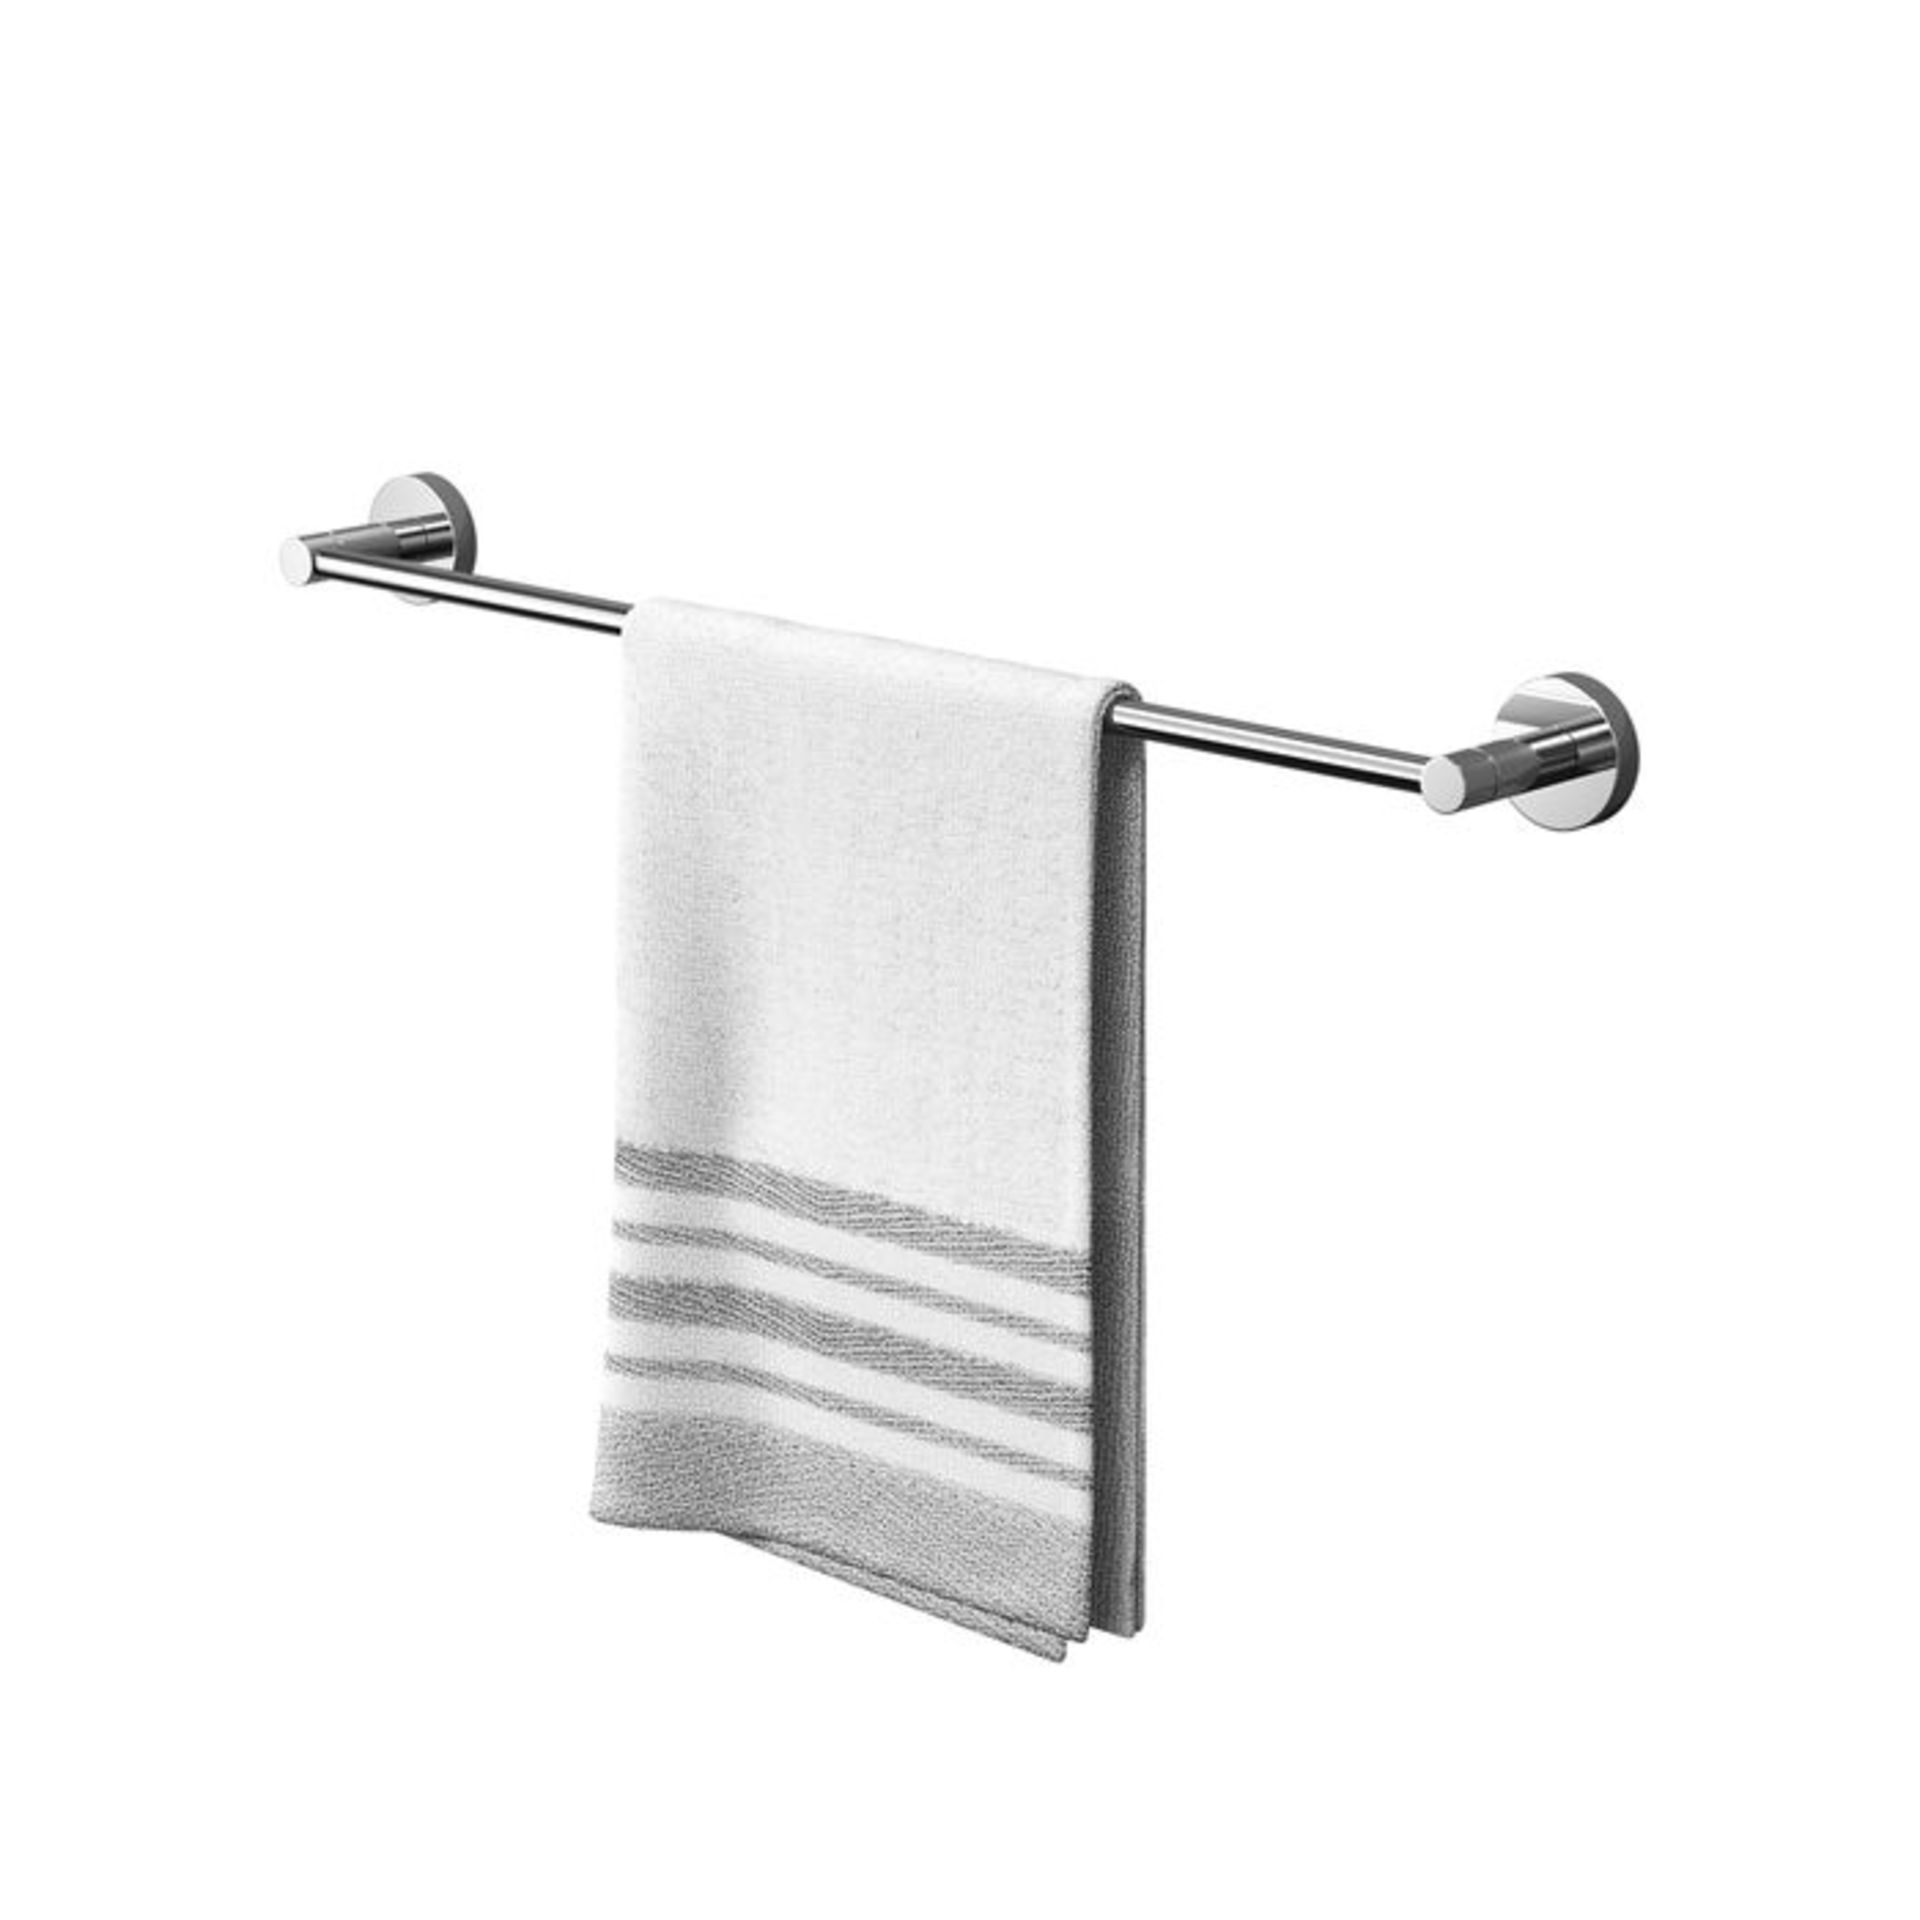 (MP19) Finsbury Towel Rail. Designed to conceal all fittings Completes your bathroom with a little - Image 5 of 5